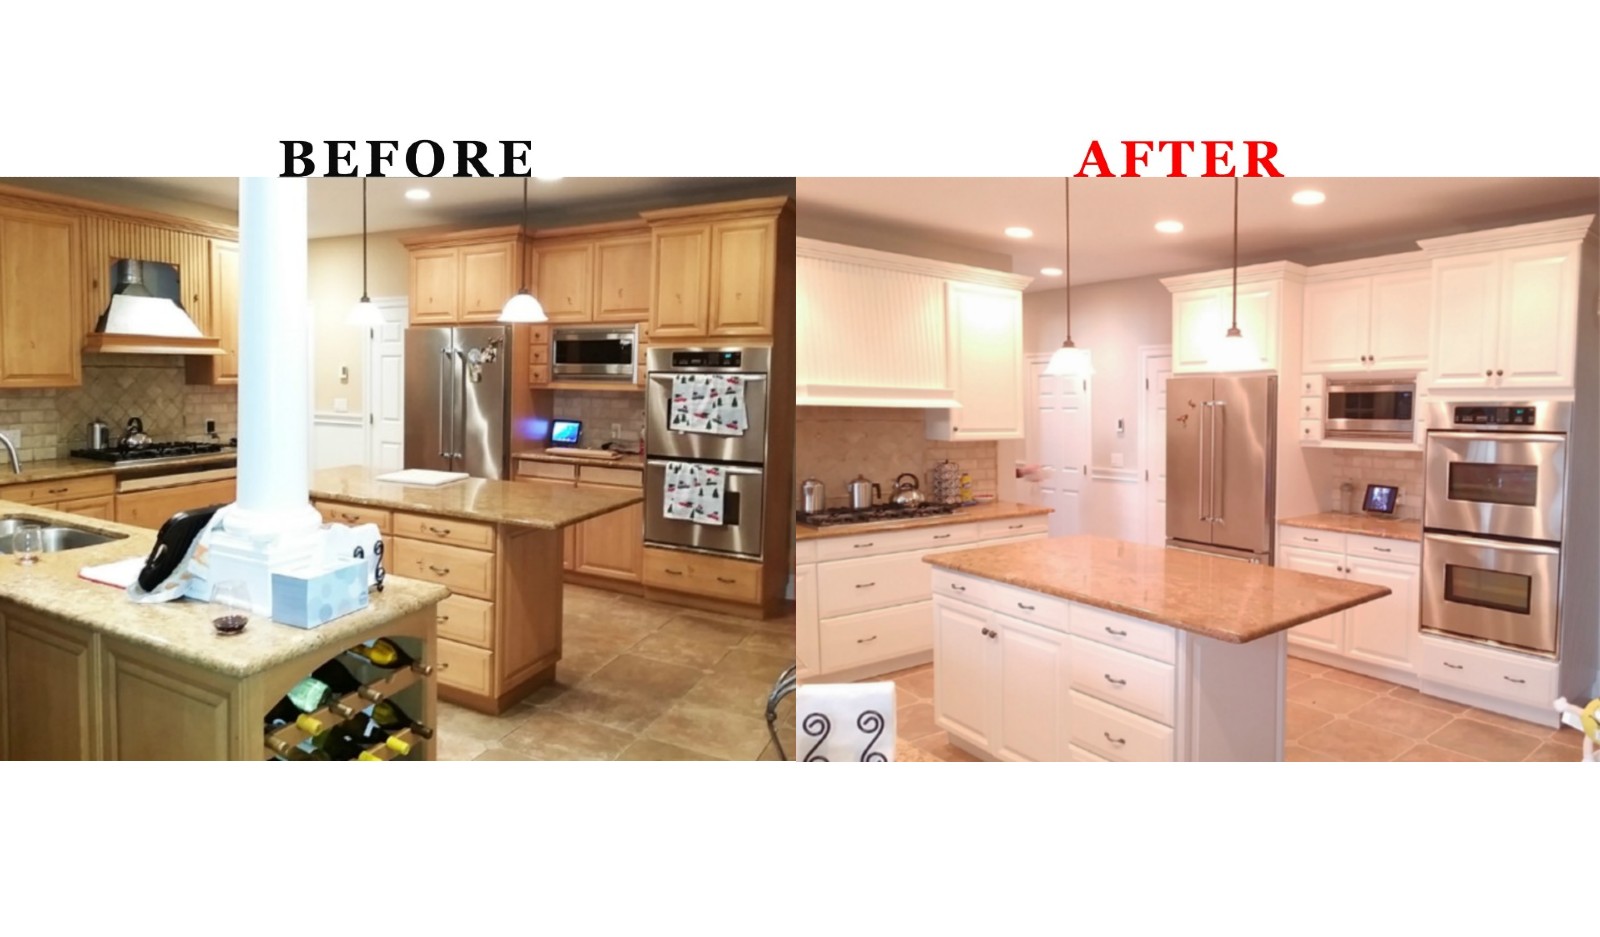 Painting Kitchen Cabinets Before And After Pictures | Cabinets Matttroy